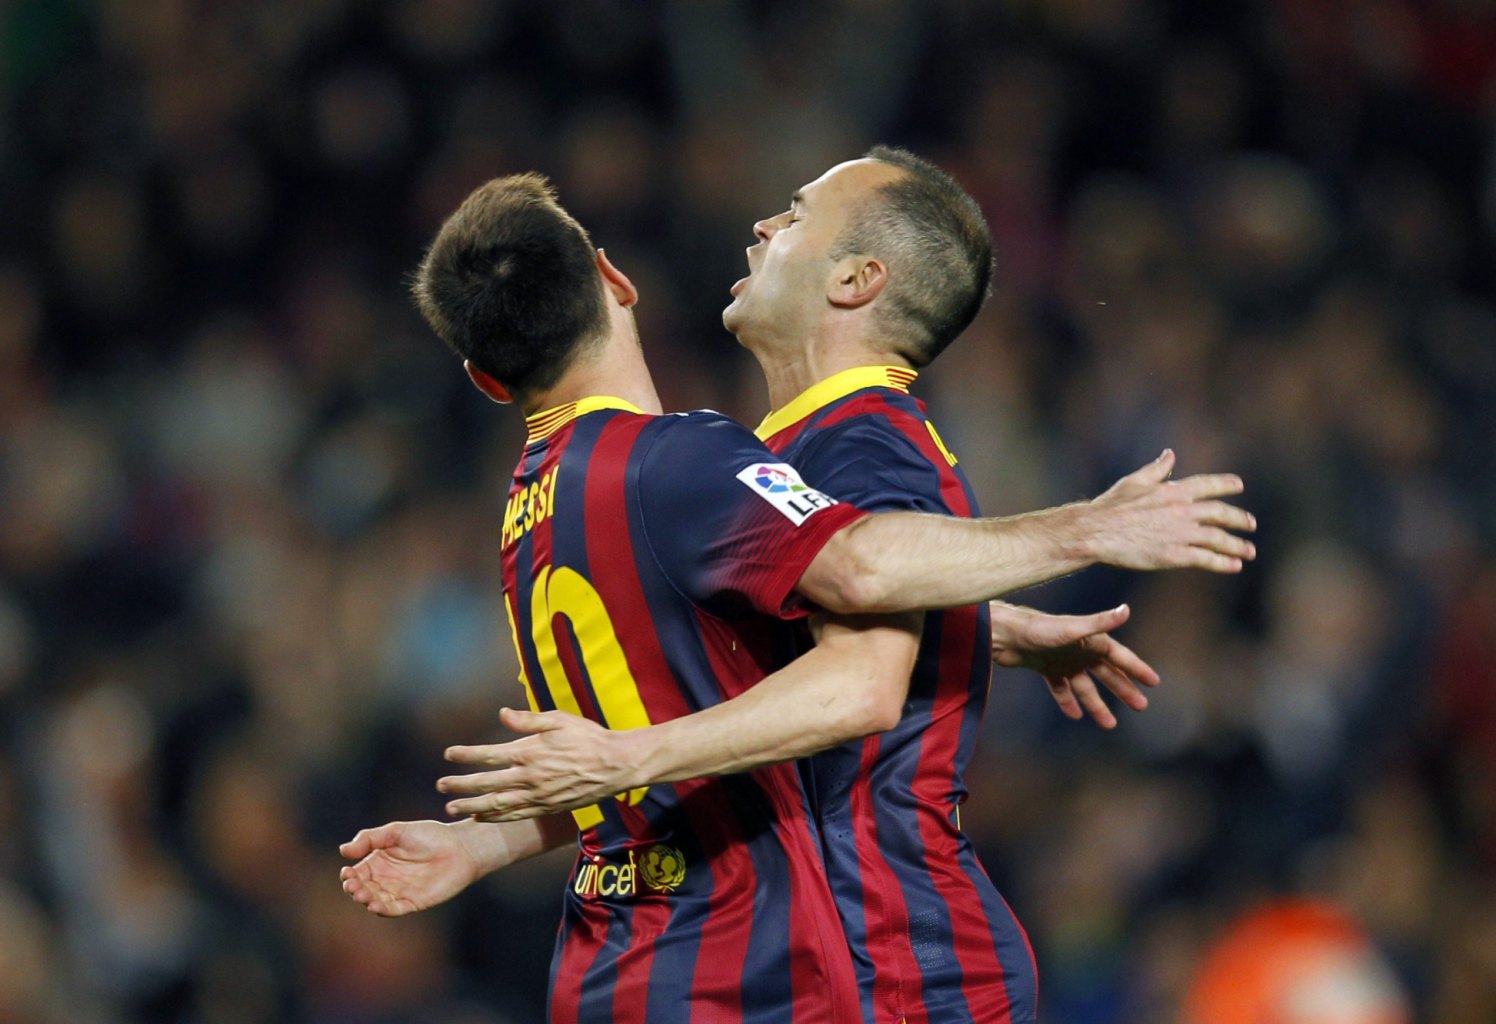 Lionel Messi and Andrés Iniesta clashing their chests